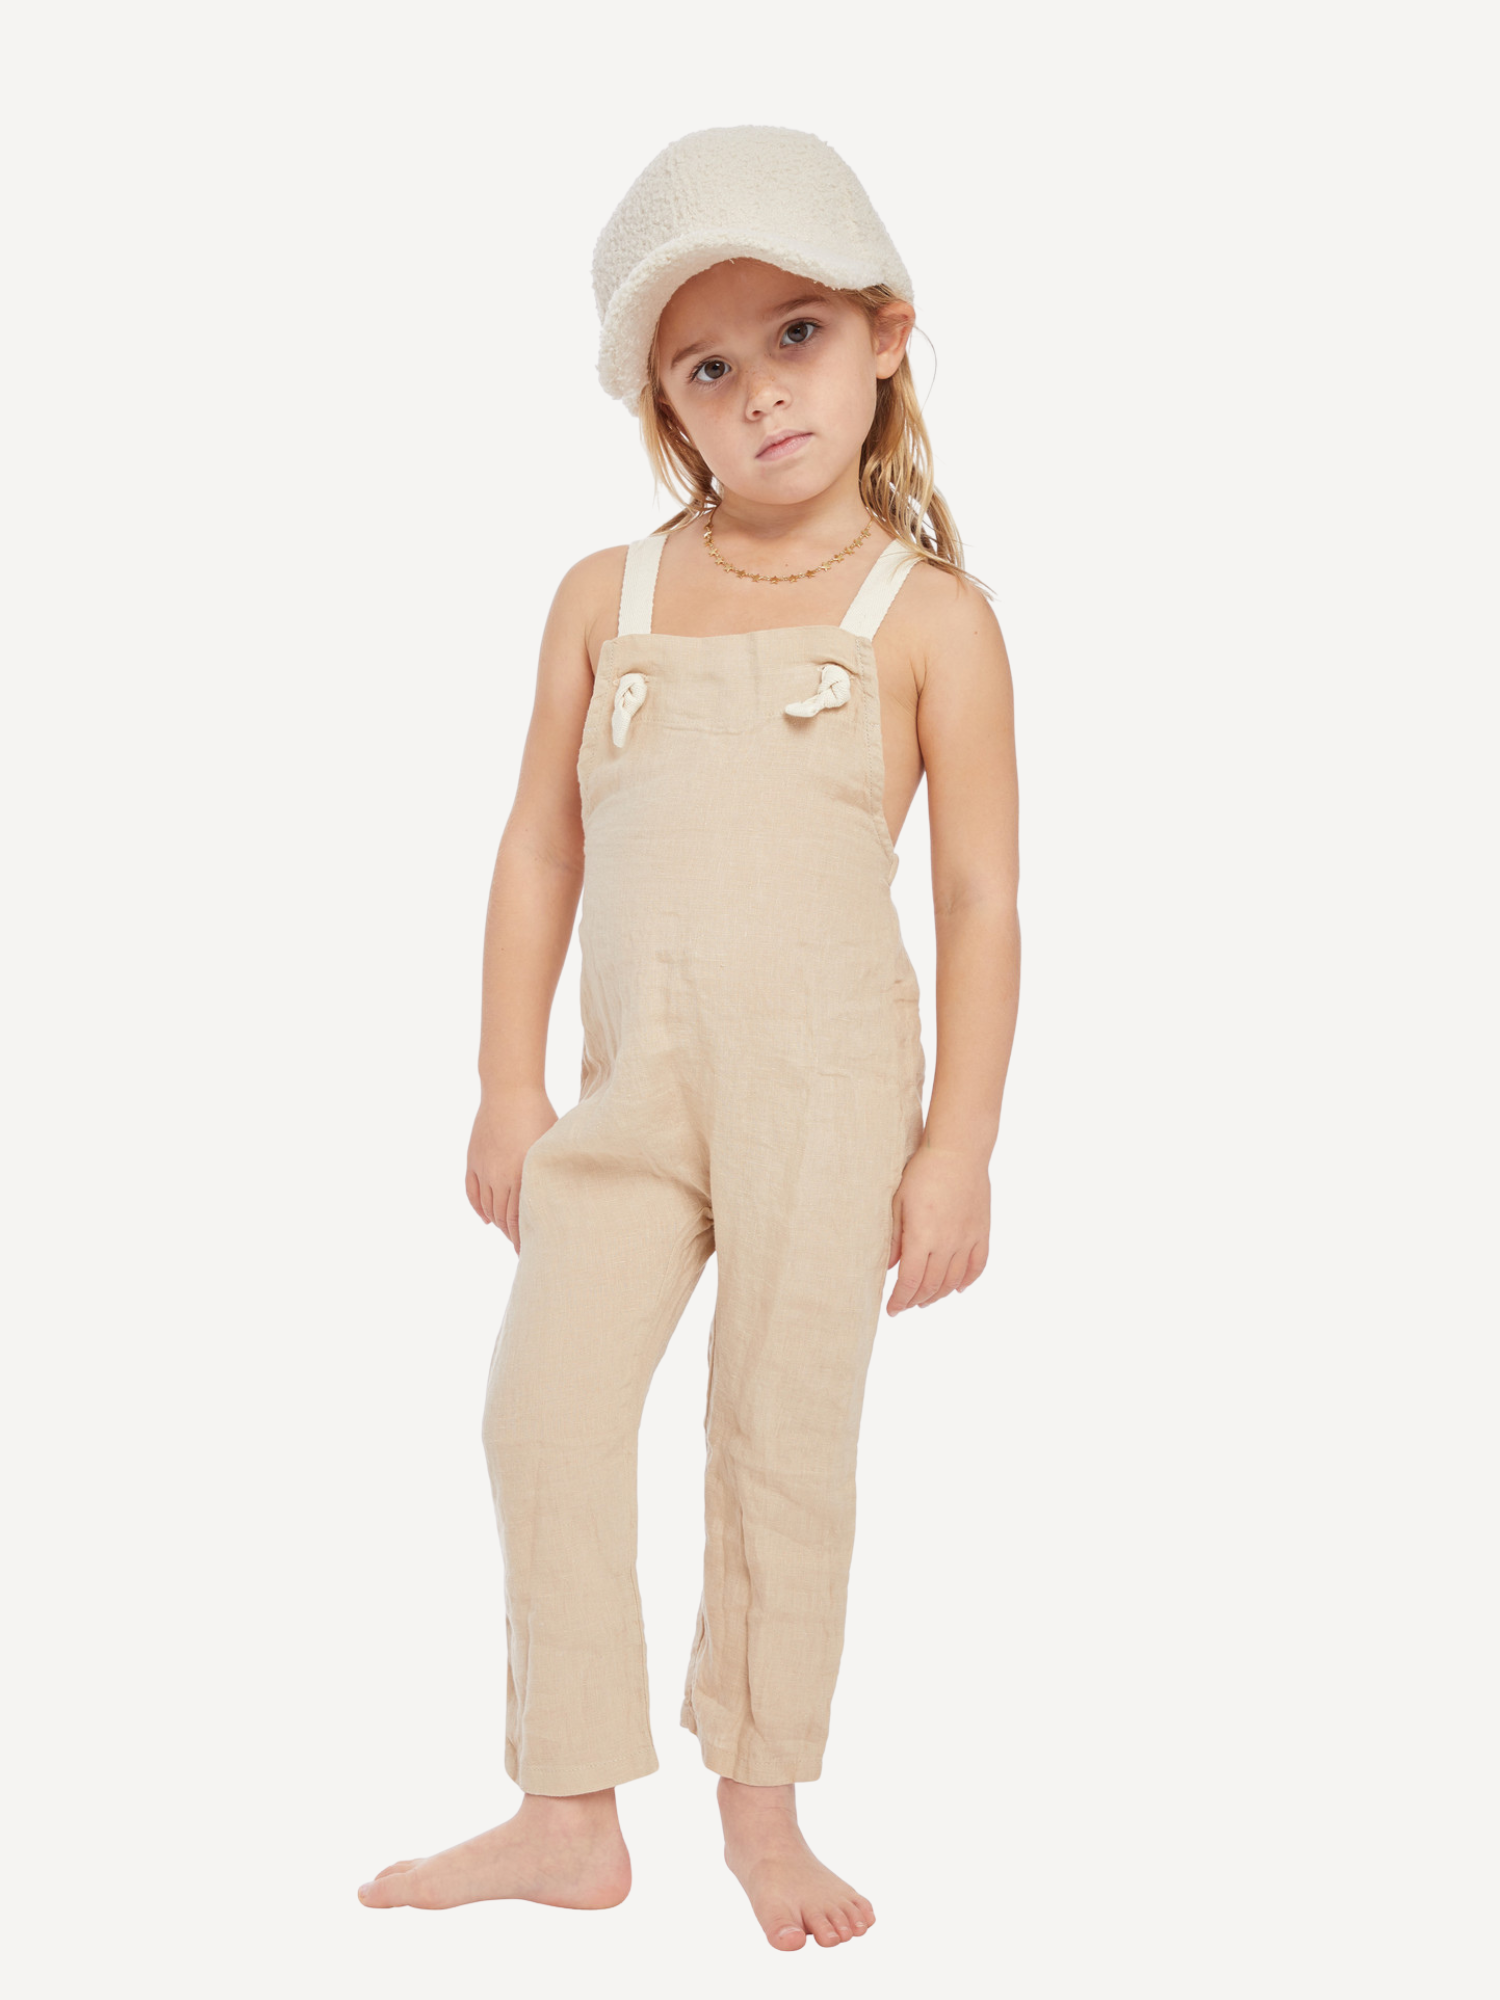 The Linen Overall